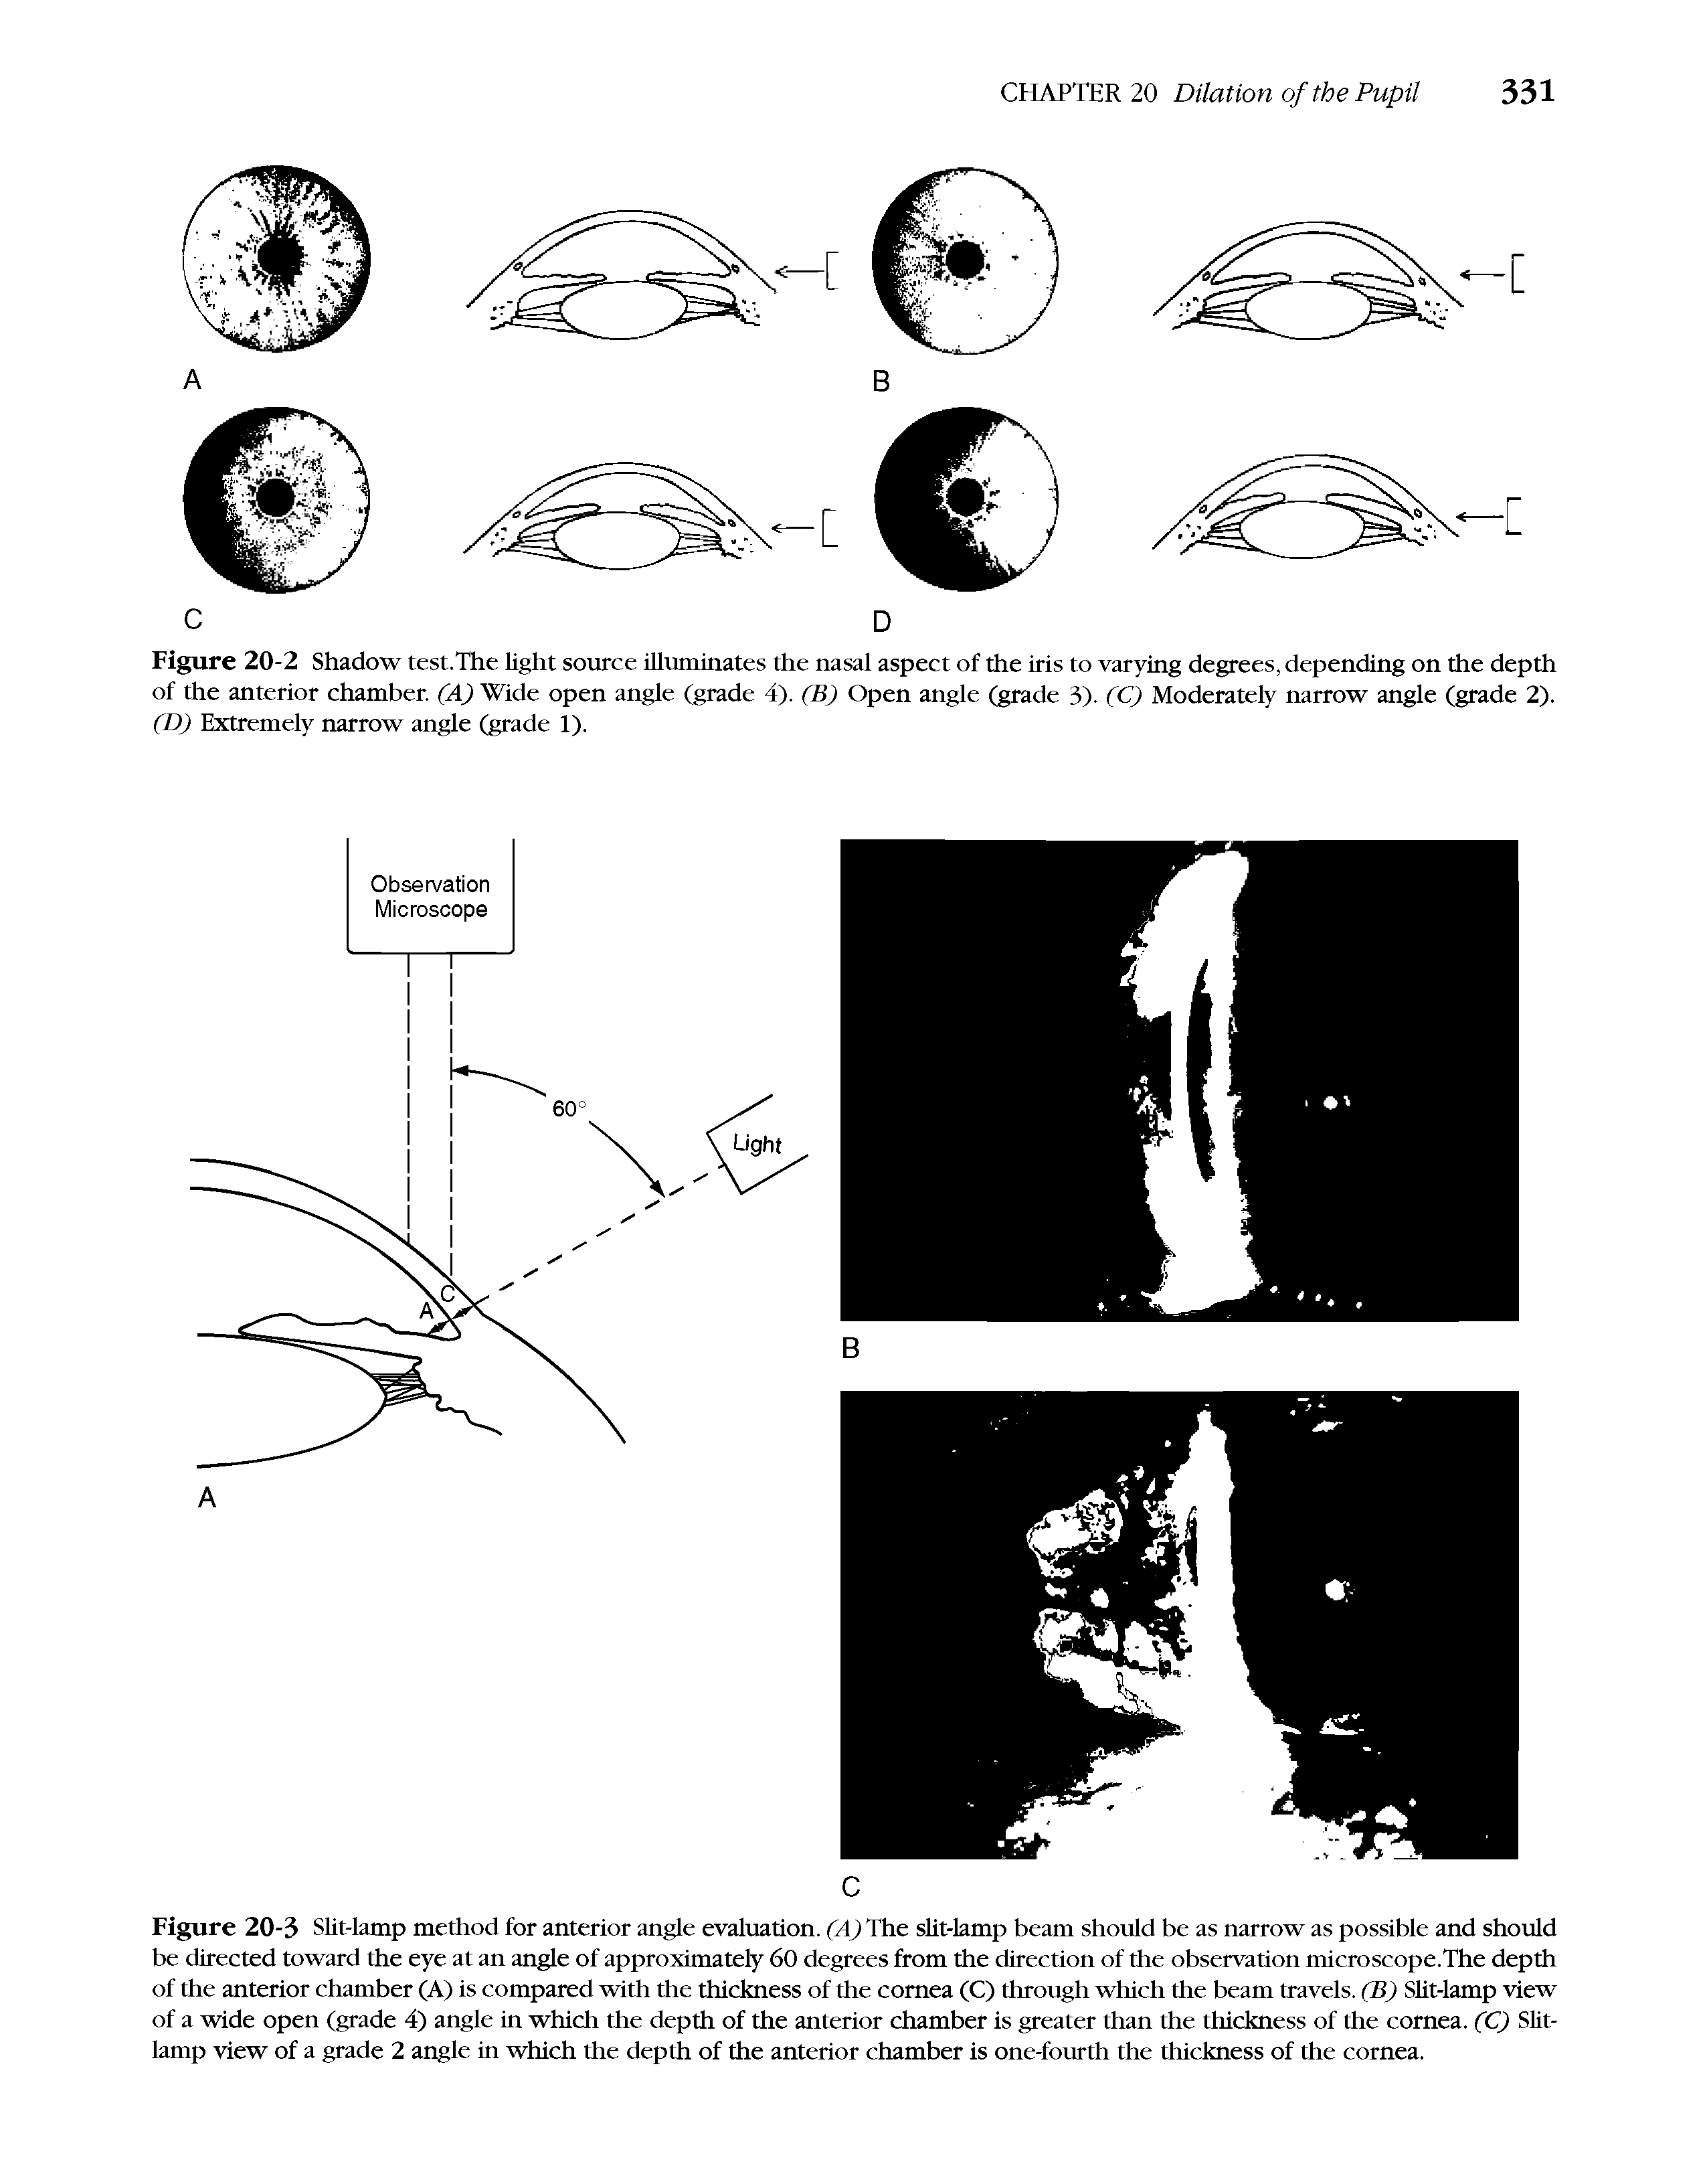 Figure 20-3 SUt-lamp method for anterior angle evaluation. (A) The sUt-lamp beam should be as narrow as possible and should be directed toward the eye at an angle of approximately 60 degrees from the direction of the observation microscope.The depth of the anterior chamber (A) is compared with the thickness of the cornea (C) through which the beam travels. (B) SUt-lamp view of a wide open (grade 4) angle in which the depth of the anterior chamber is greater than the thickness of the cornea. CC) SUt-lamp view of a grade 2 angle in which the depth of the anterior chamber is one-fourth the thickness of the cornea.